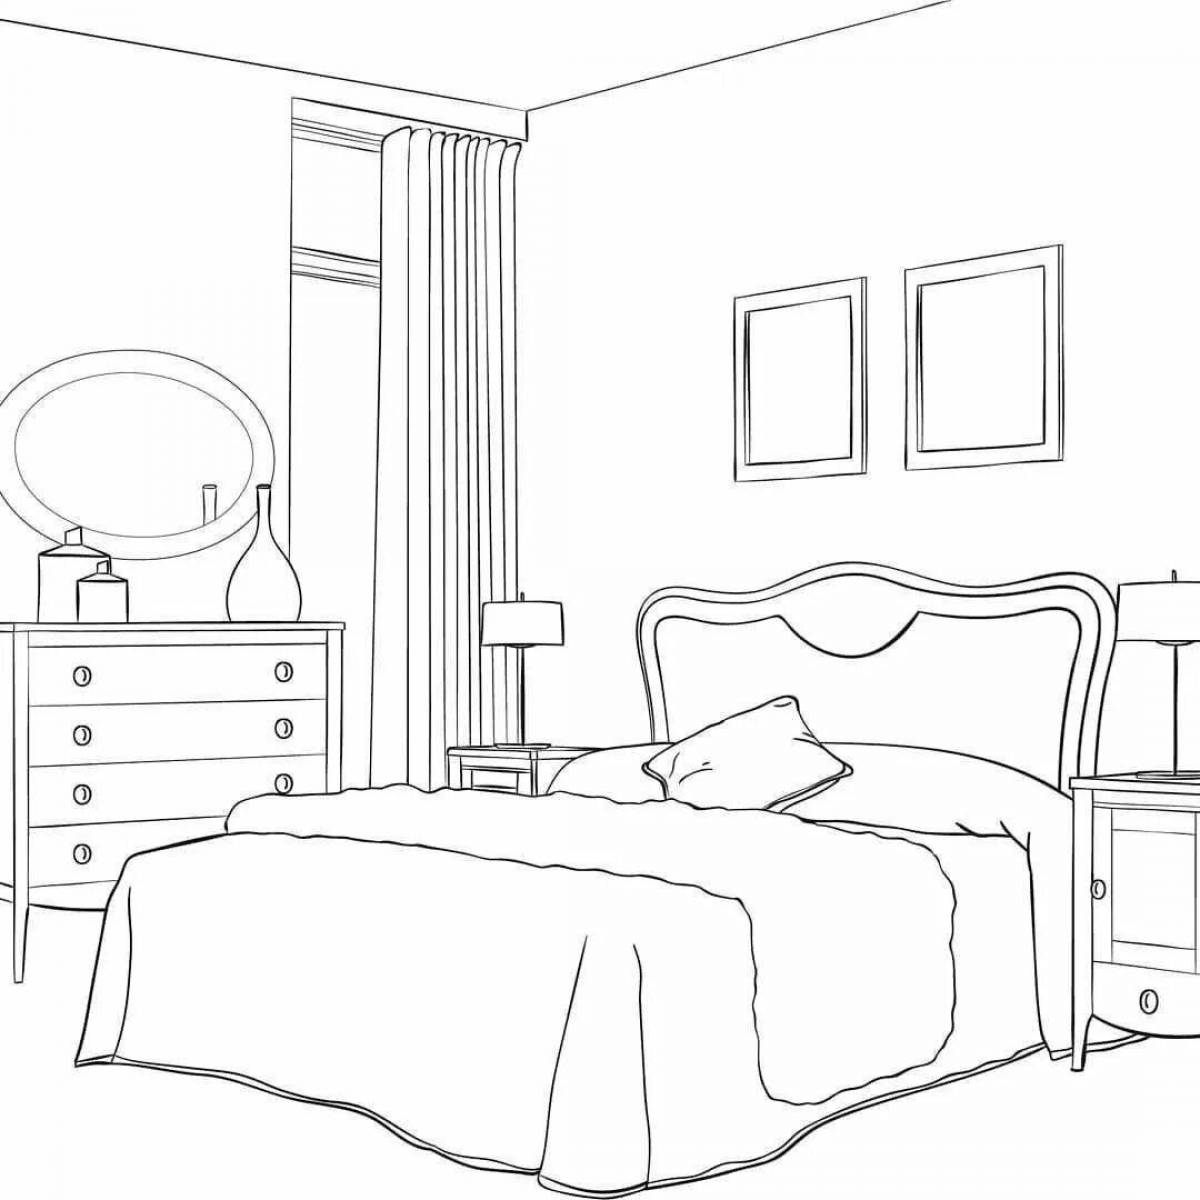 Effective coloring for the bedroom